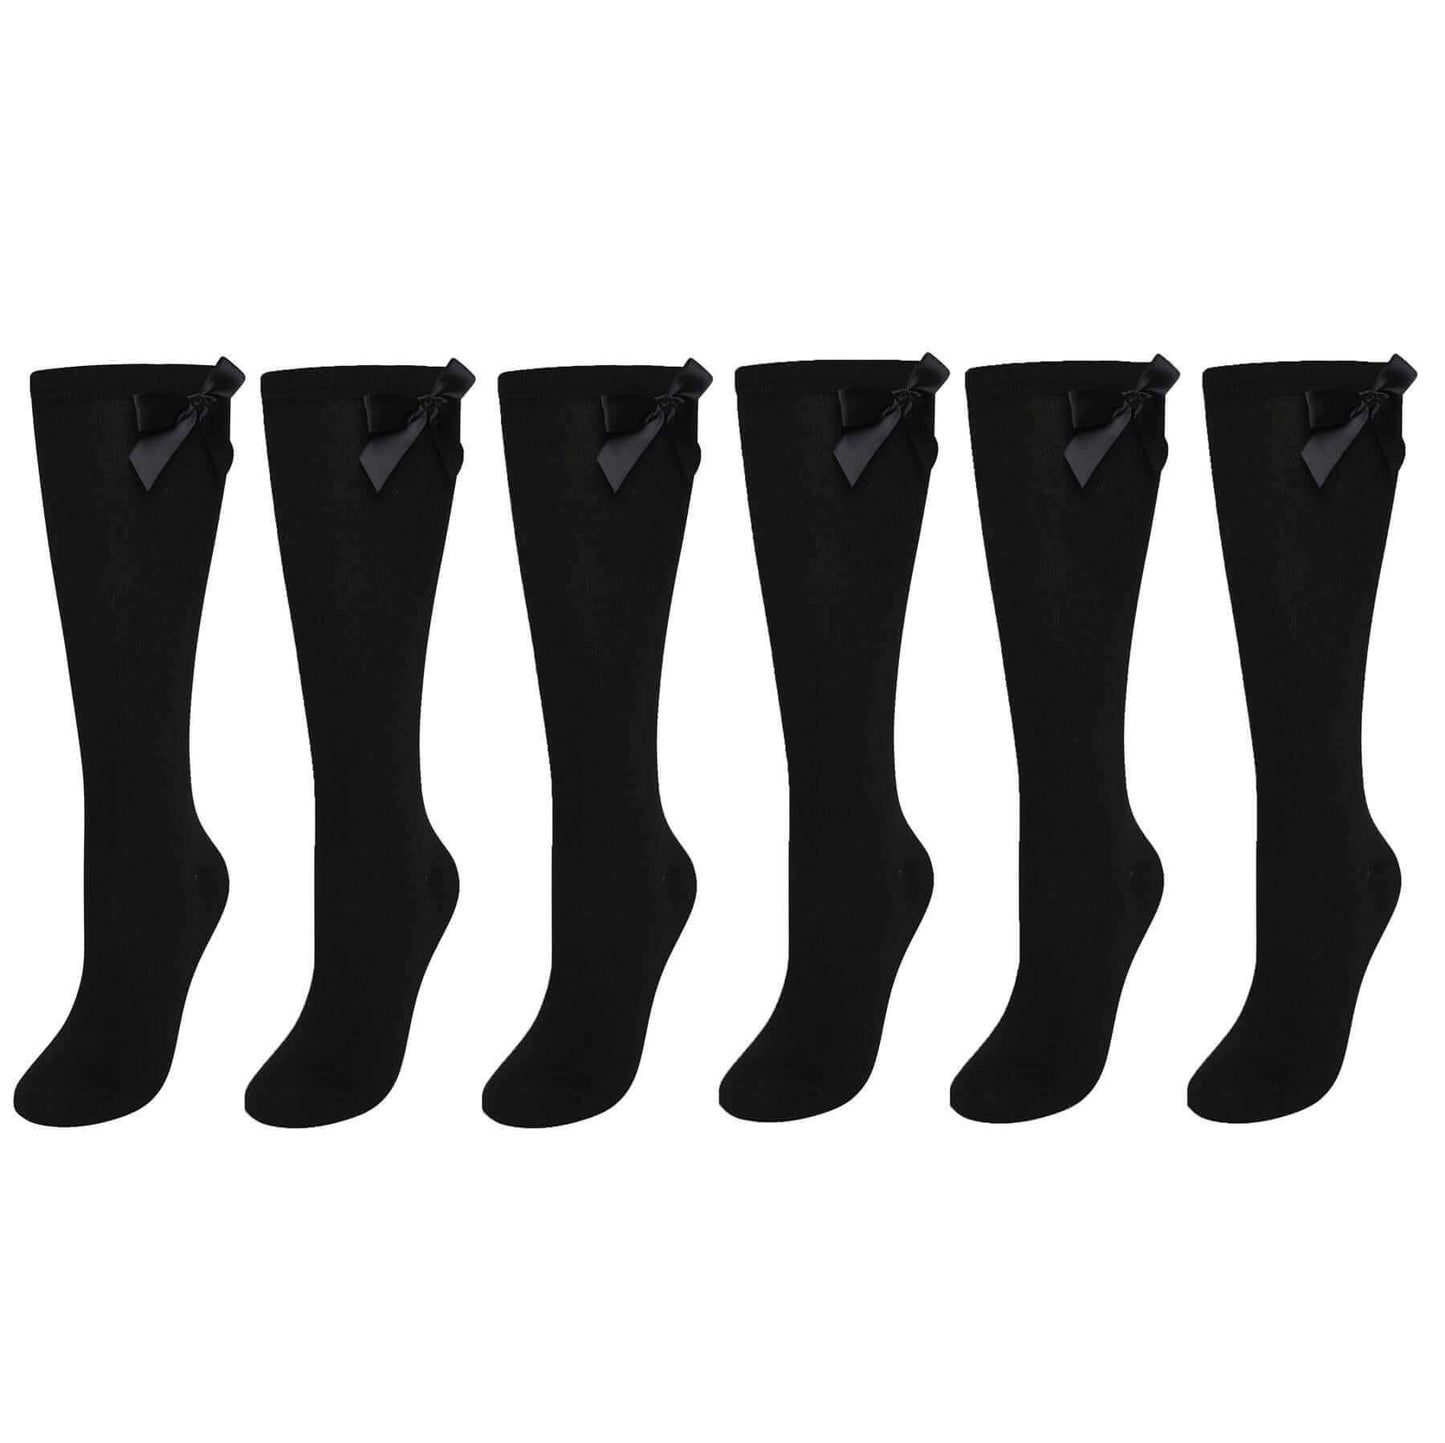 6 Pairs Of Girls Knee High Socks Long School Socks With Ribbons Bows. Buy now for £8.00. A Socks by Sock Stack. 12-3, 4-6, 6-8, 9-12, black, bow tie, childrens, cotton, girls, grey, kids, navy, ribbon, school, socks, white.